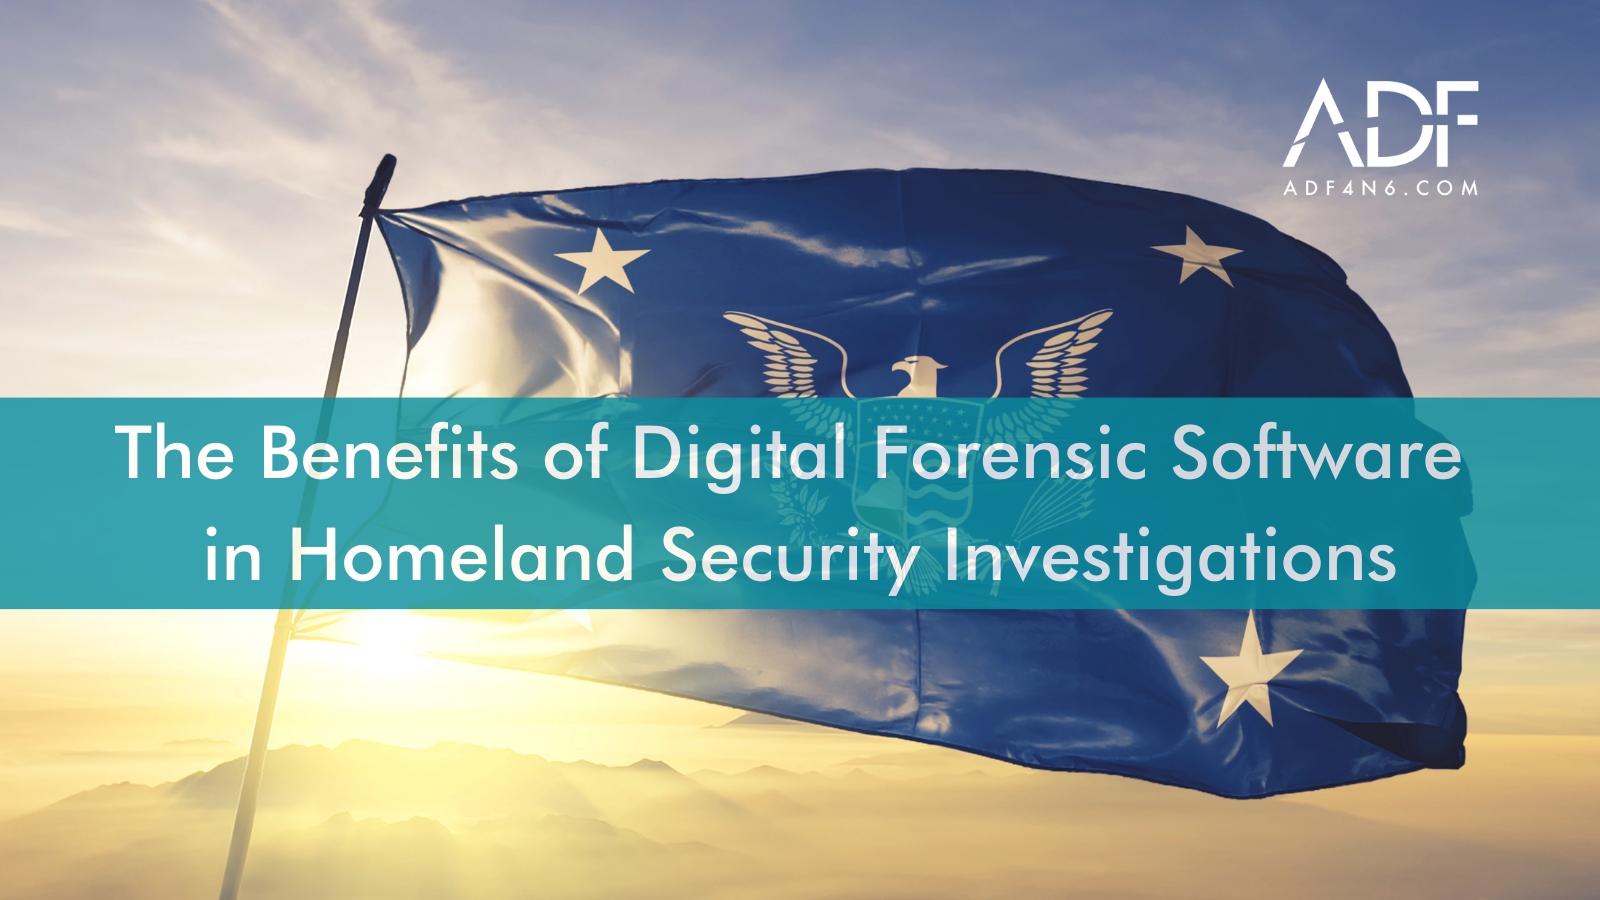 The Benefits of Digital Forensic Software in Homeland Security Investigations